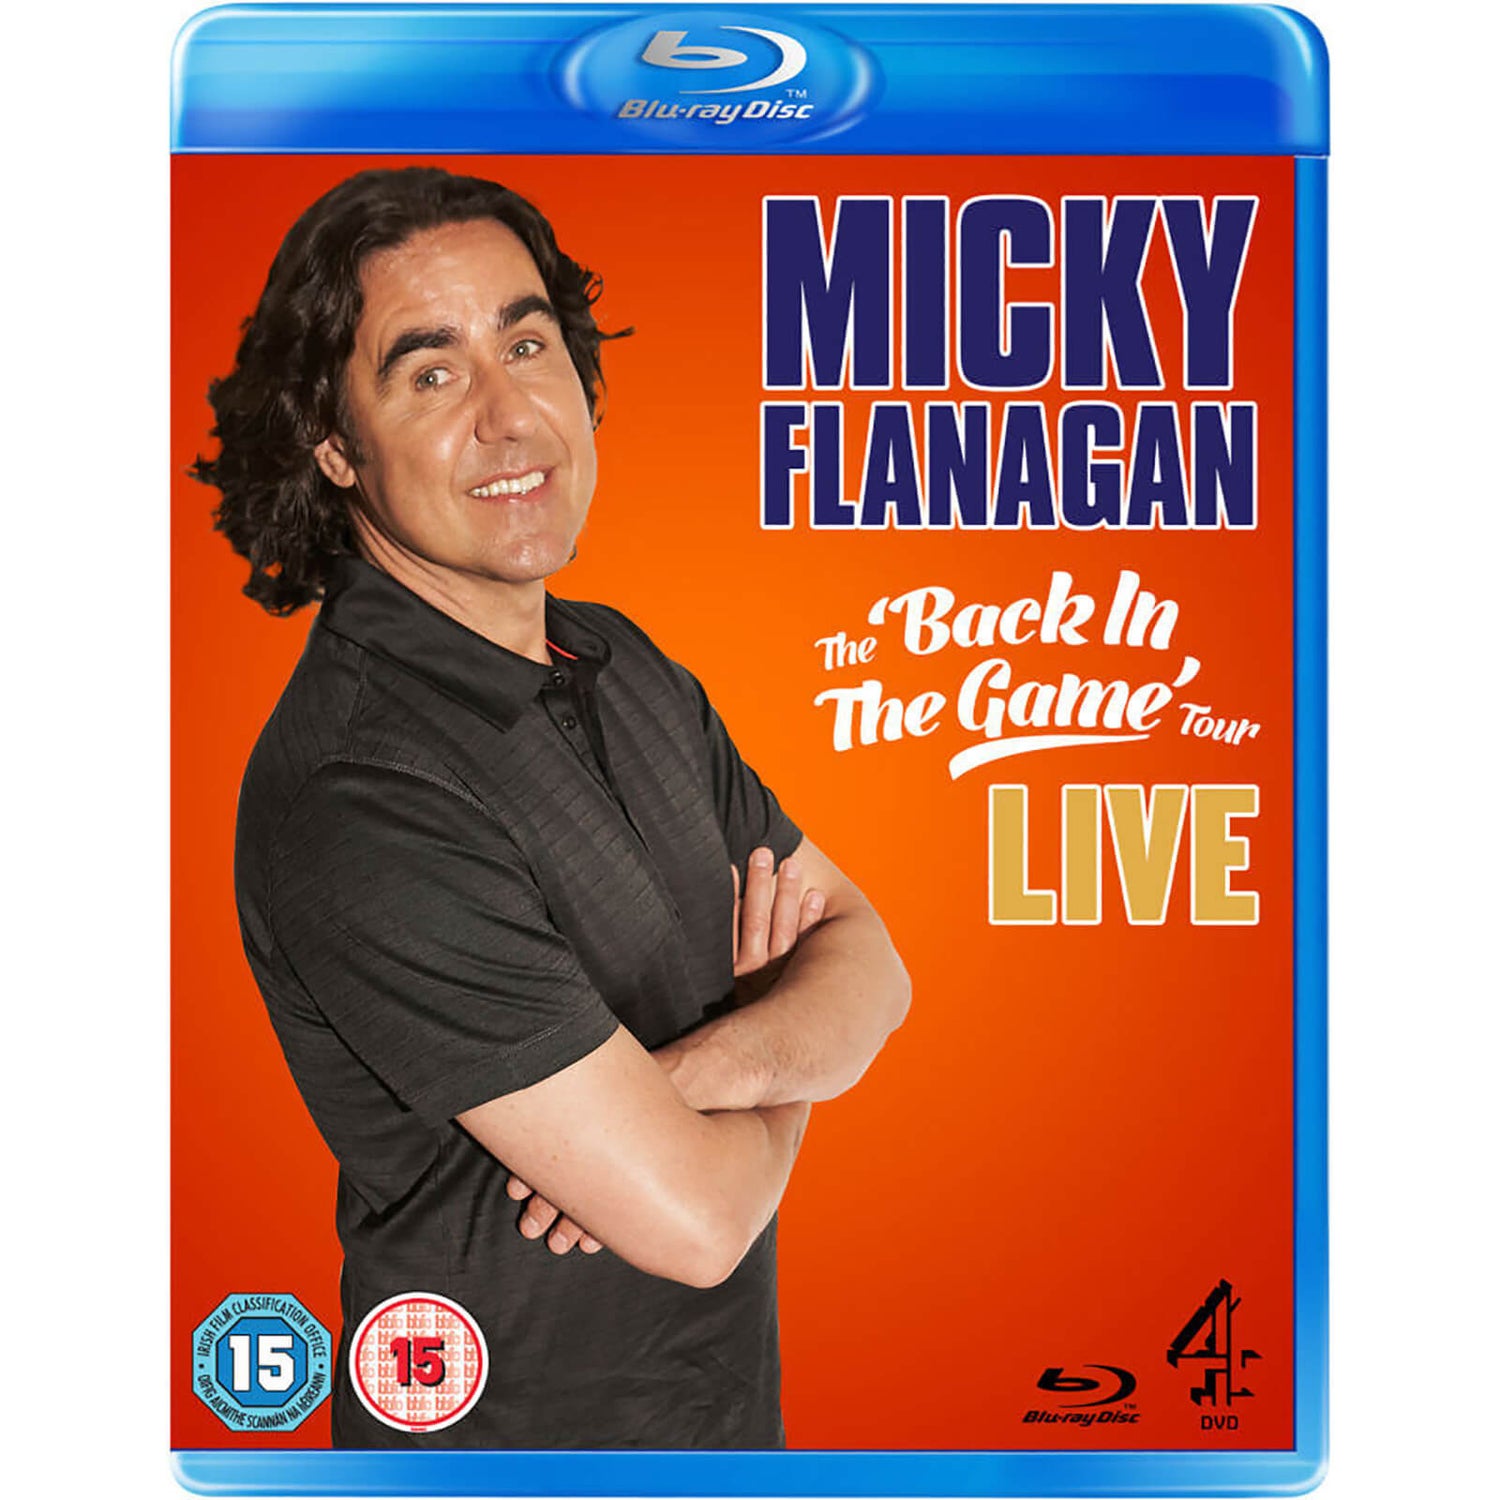 Micky Flanagan: Back in Game